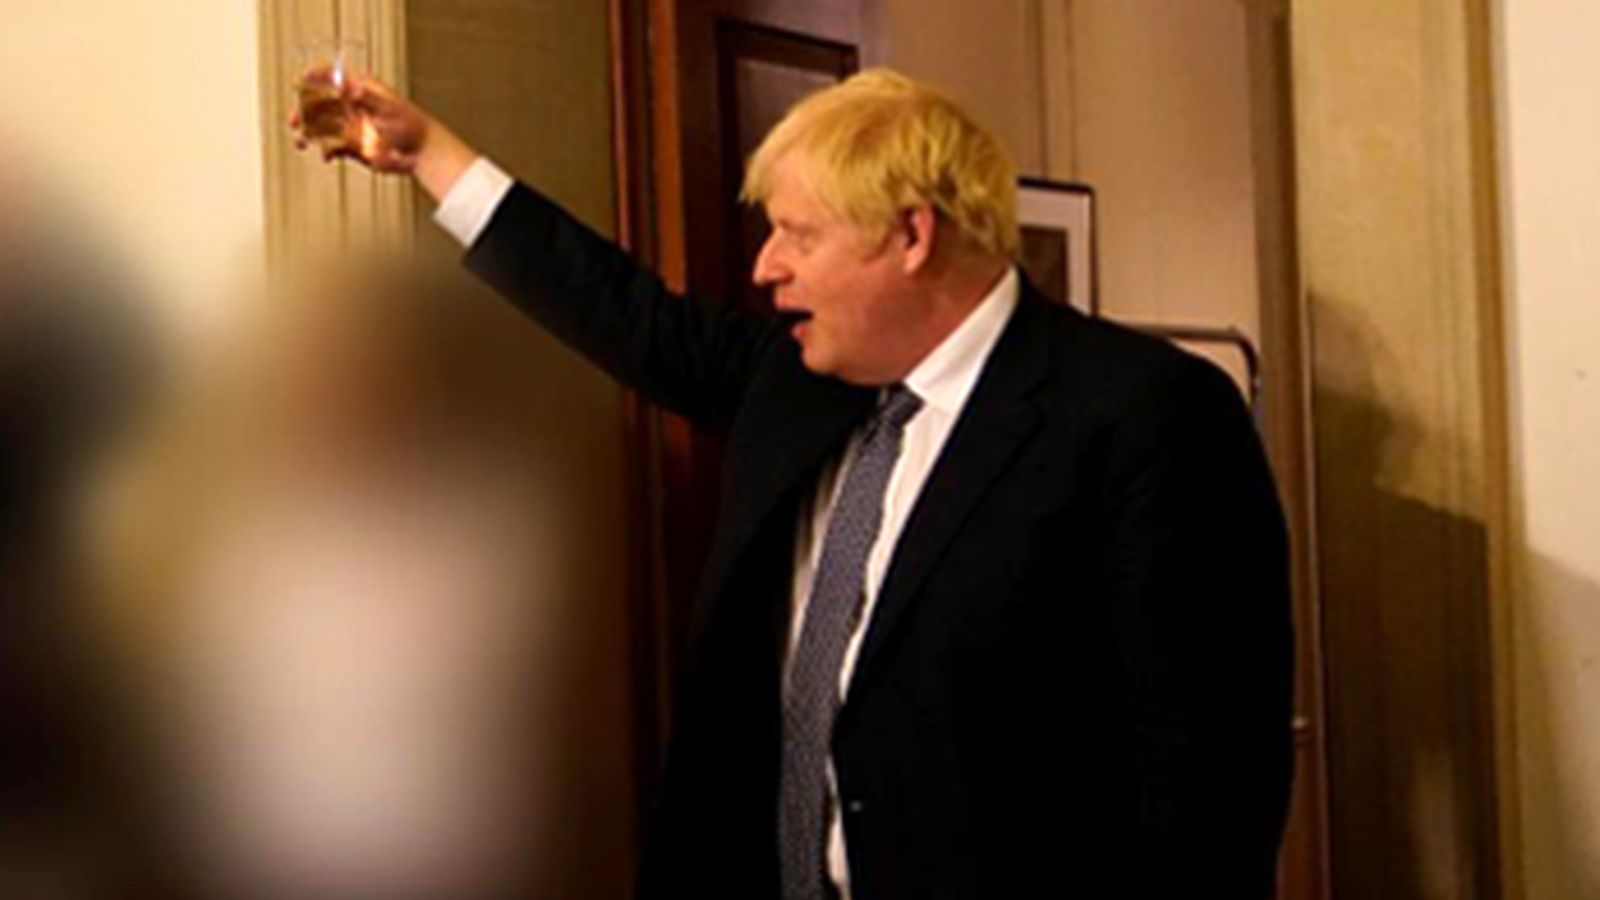 Boris Johnson to submit defence dossier ahead of televised partygate interrogation by MPs